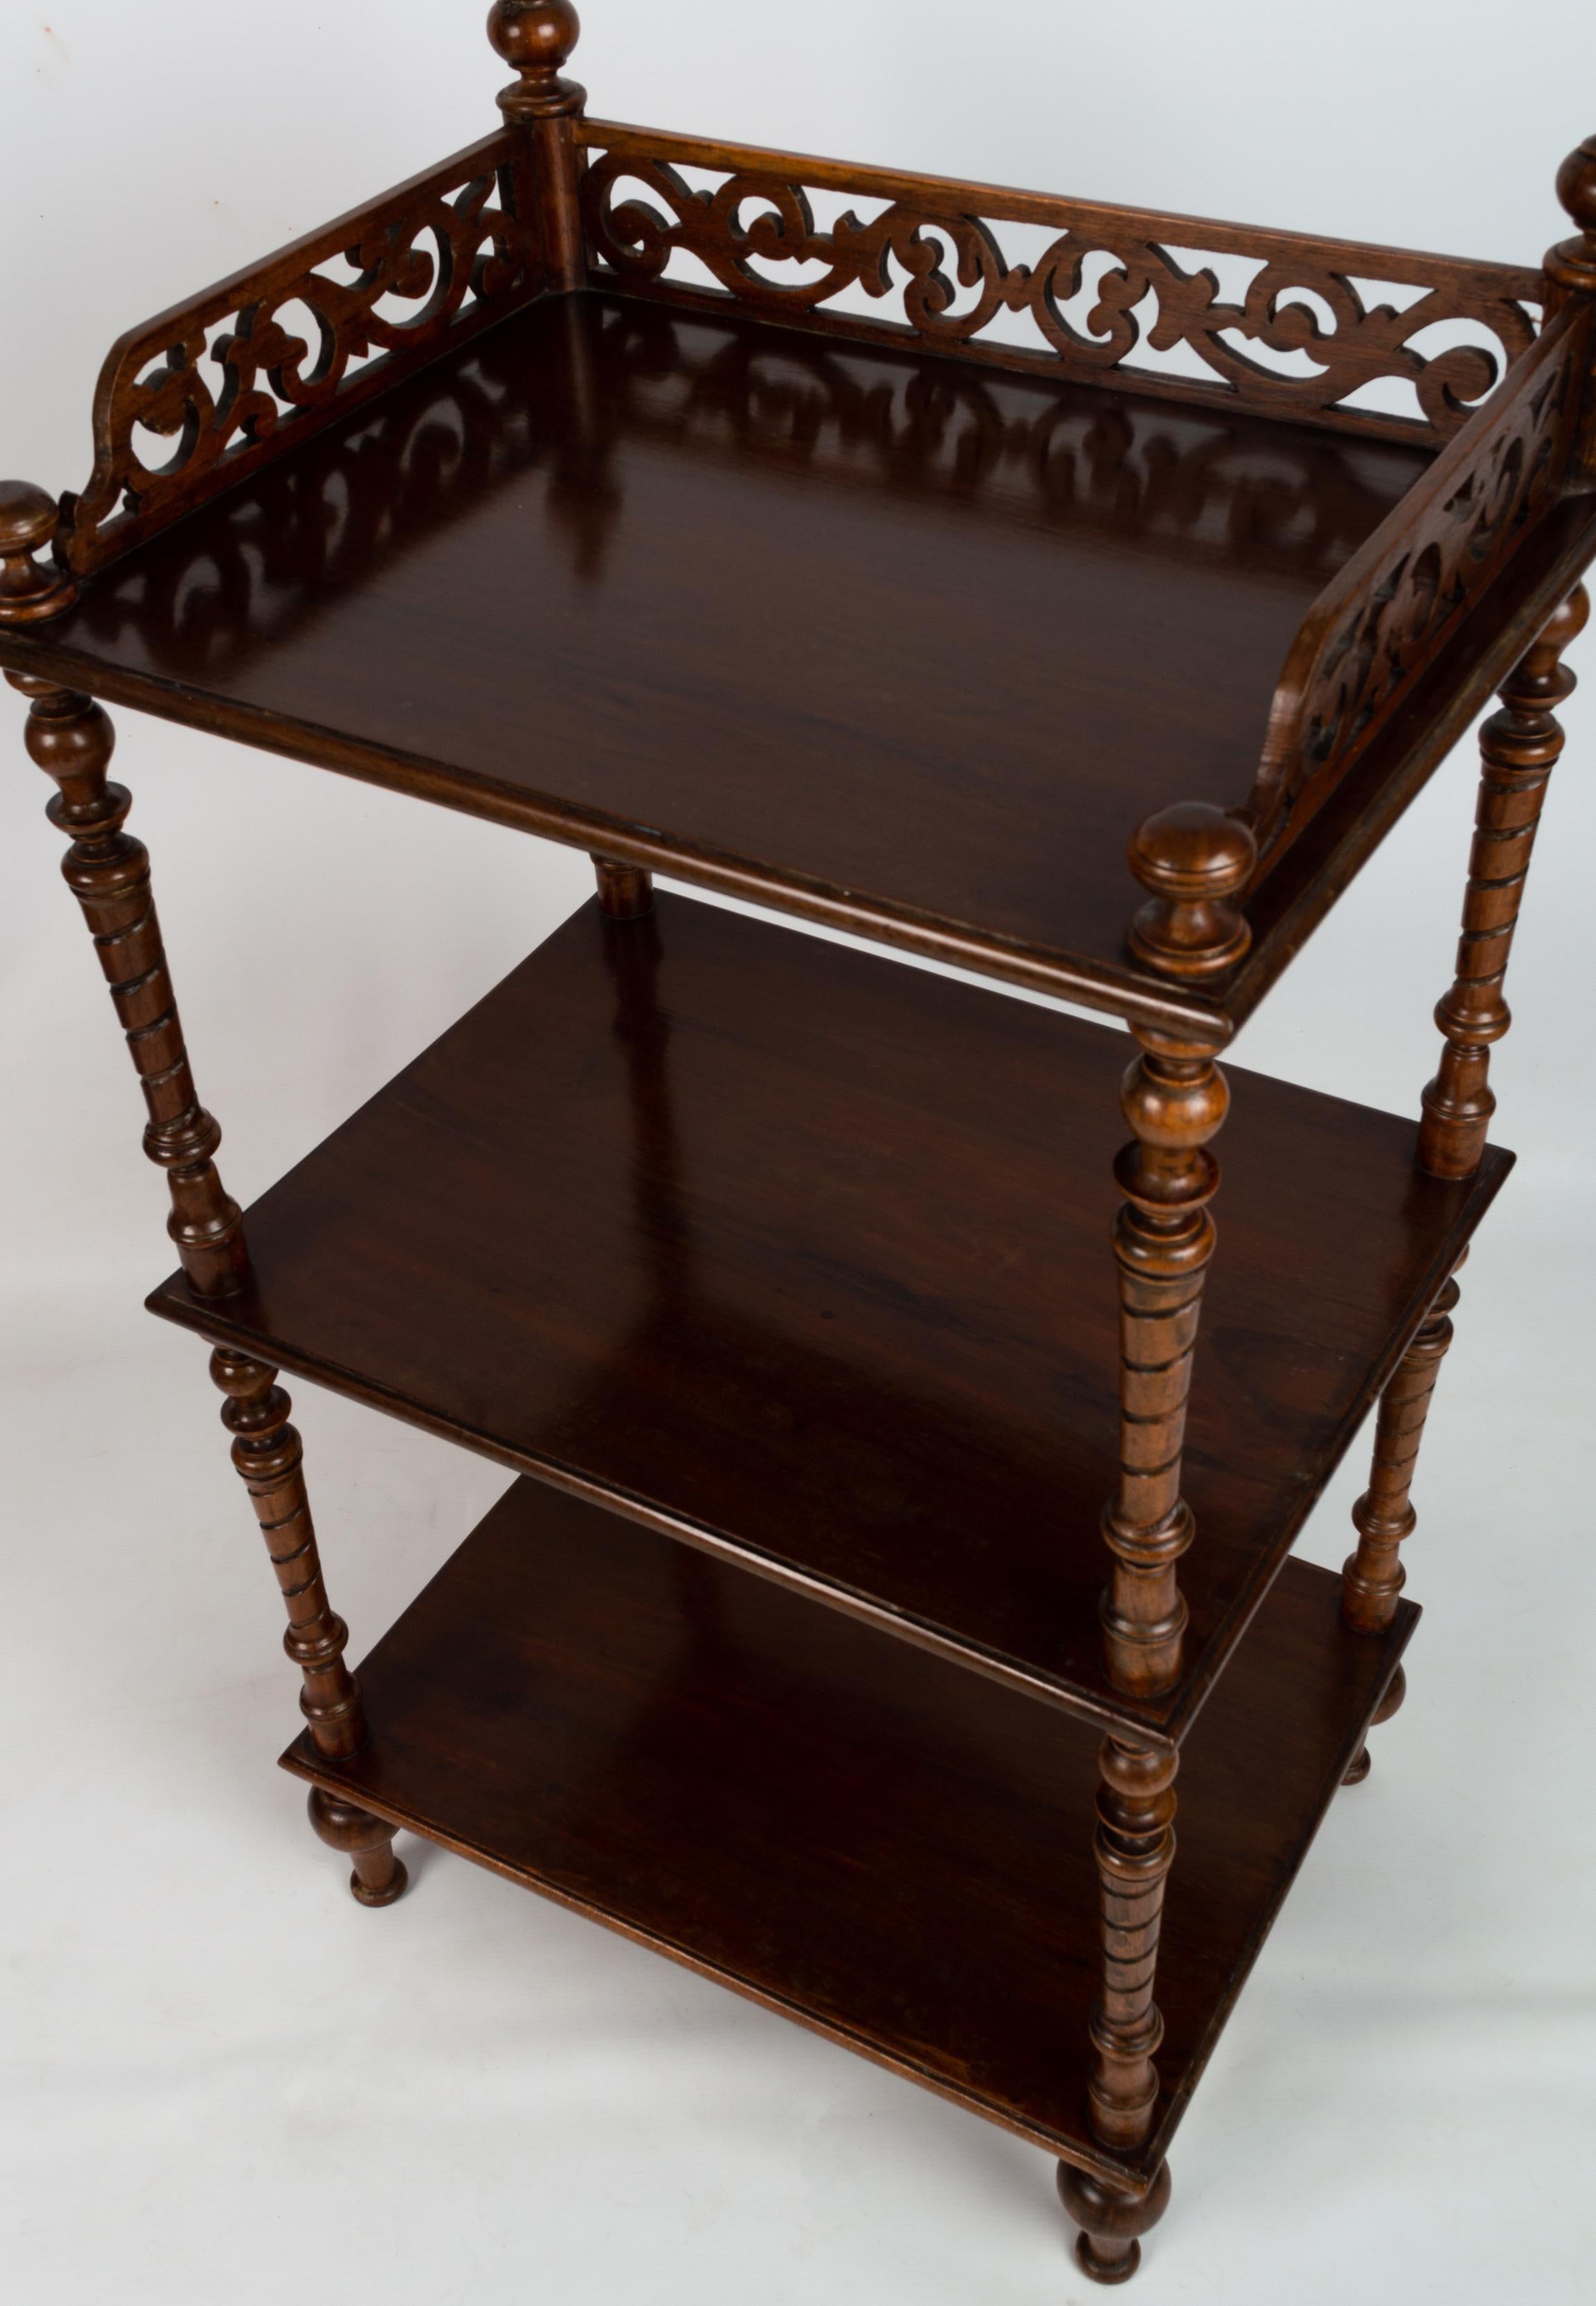 Antique English Victorian Carved Mahogany Whatnot Etagere Shelves C.1880 For Sale 3